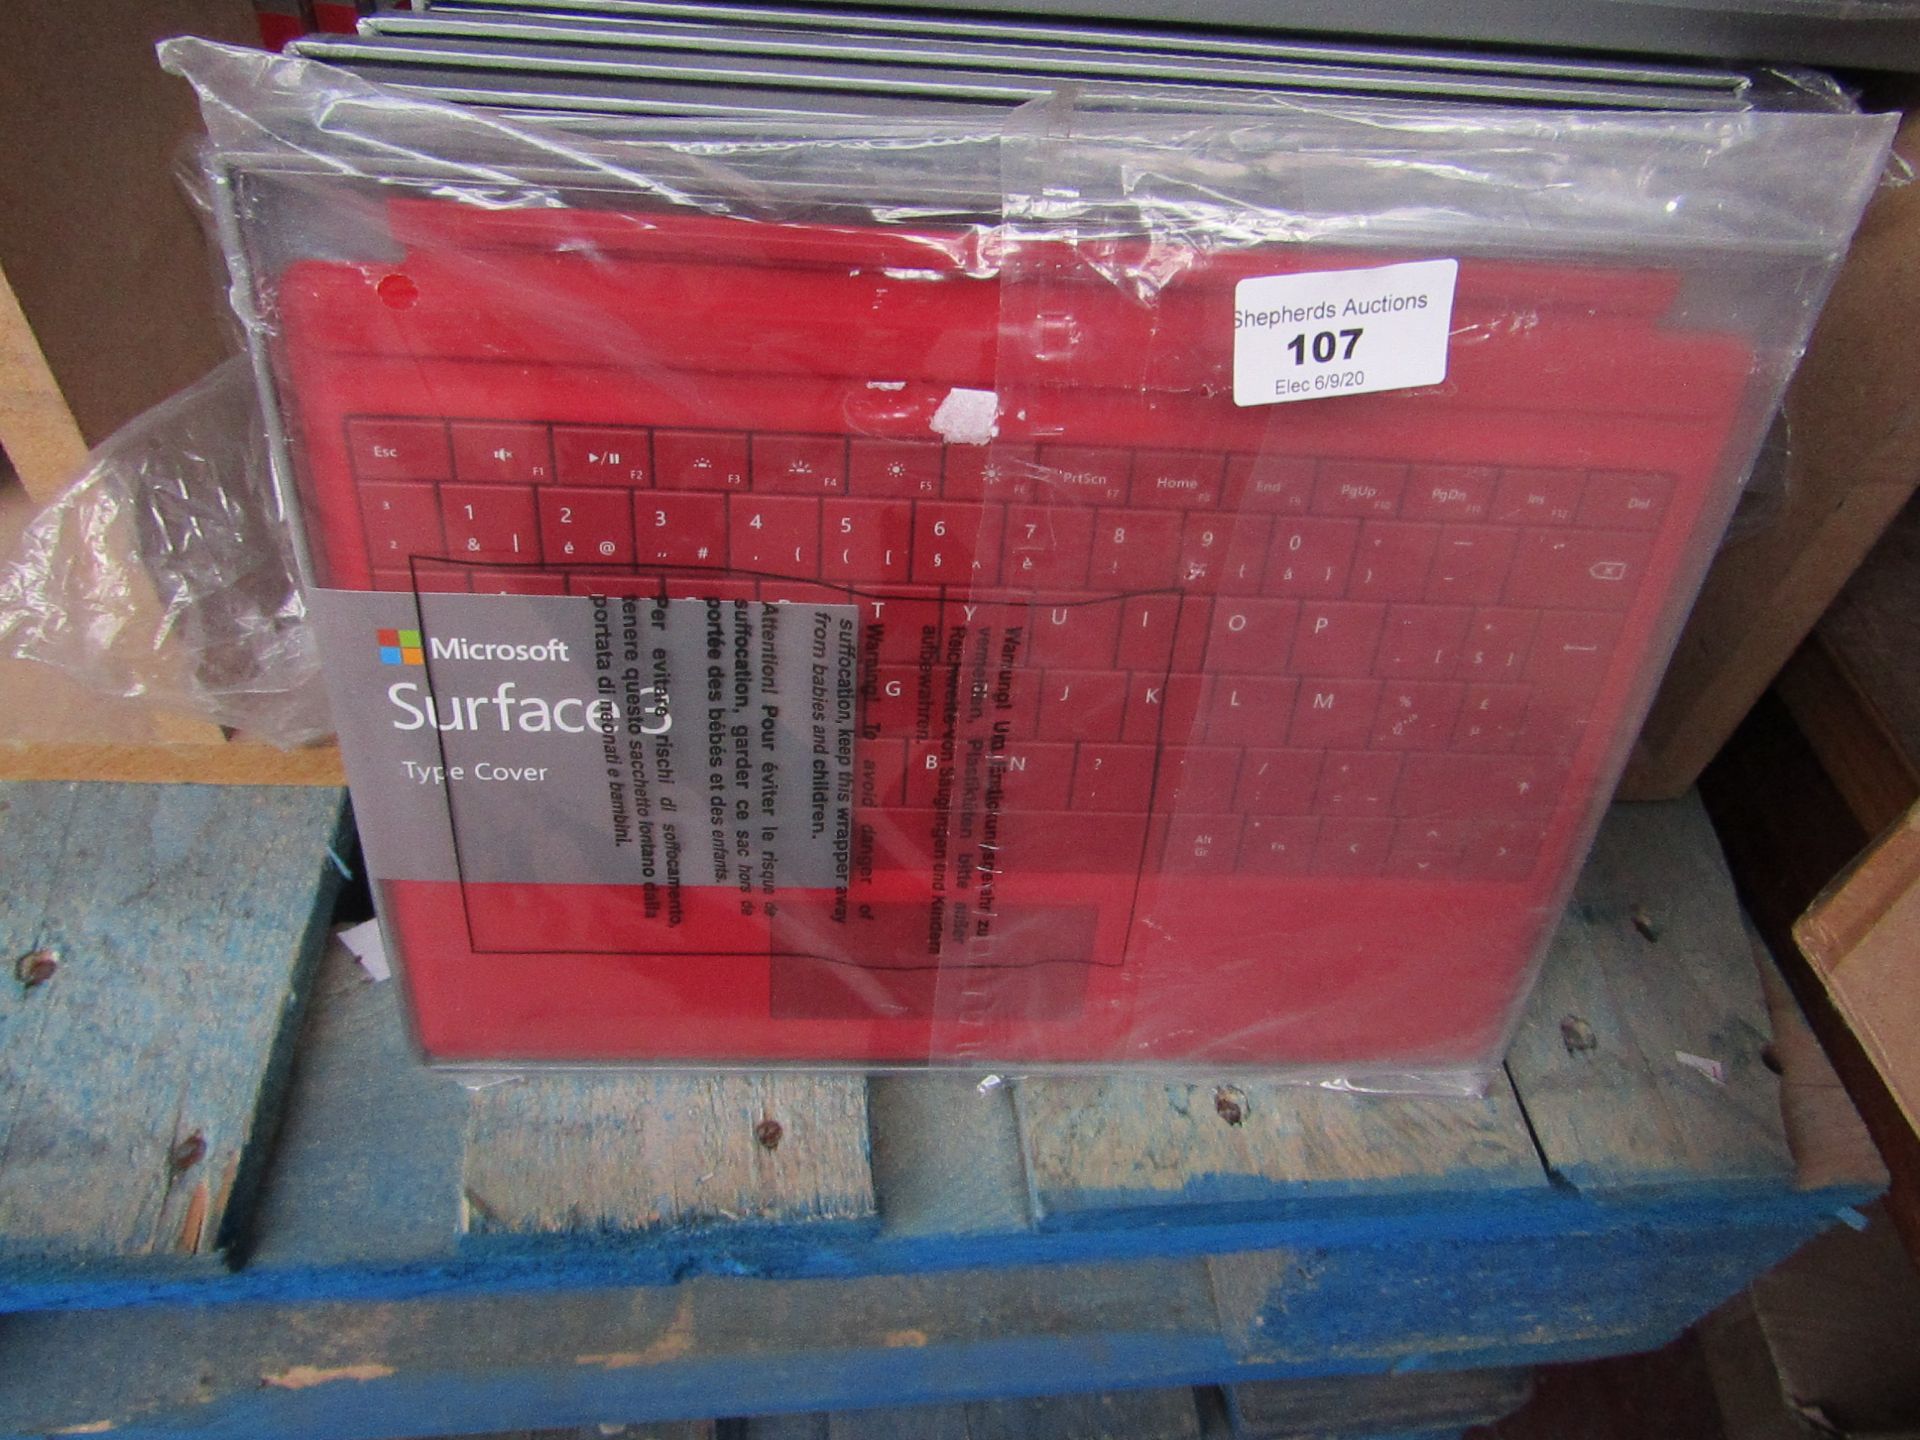 4x Microsoft Surface 3 Type cover, looks to be unused in original packaging but this is not